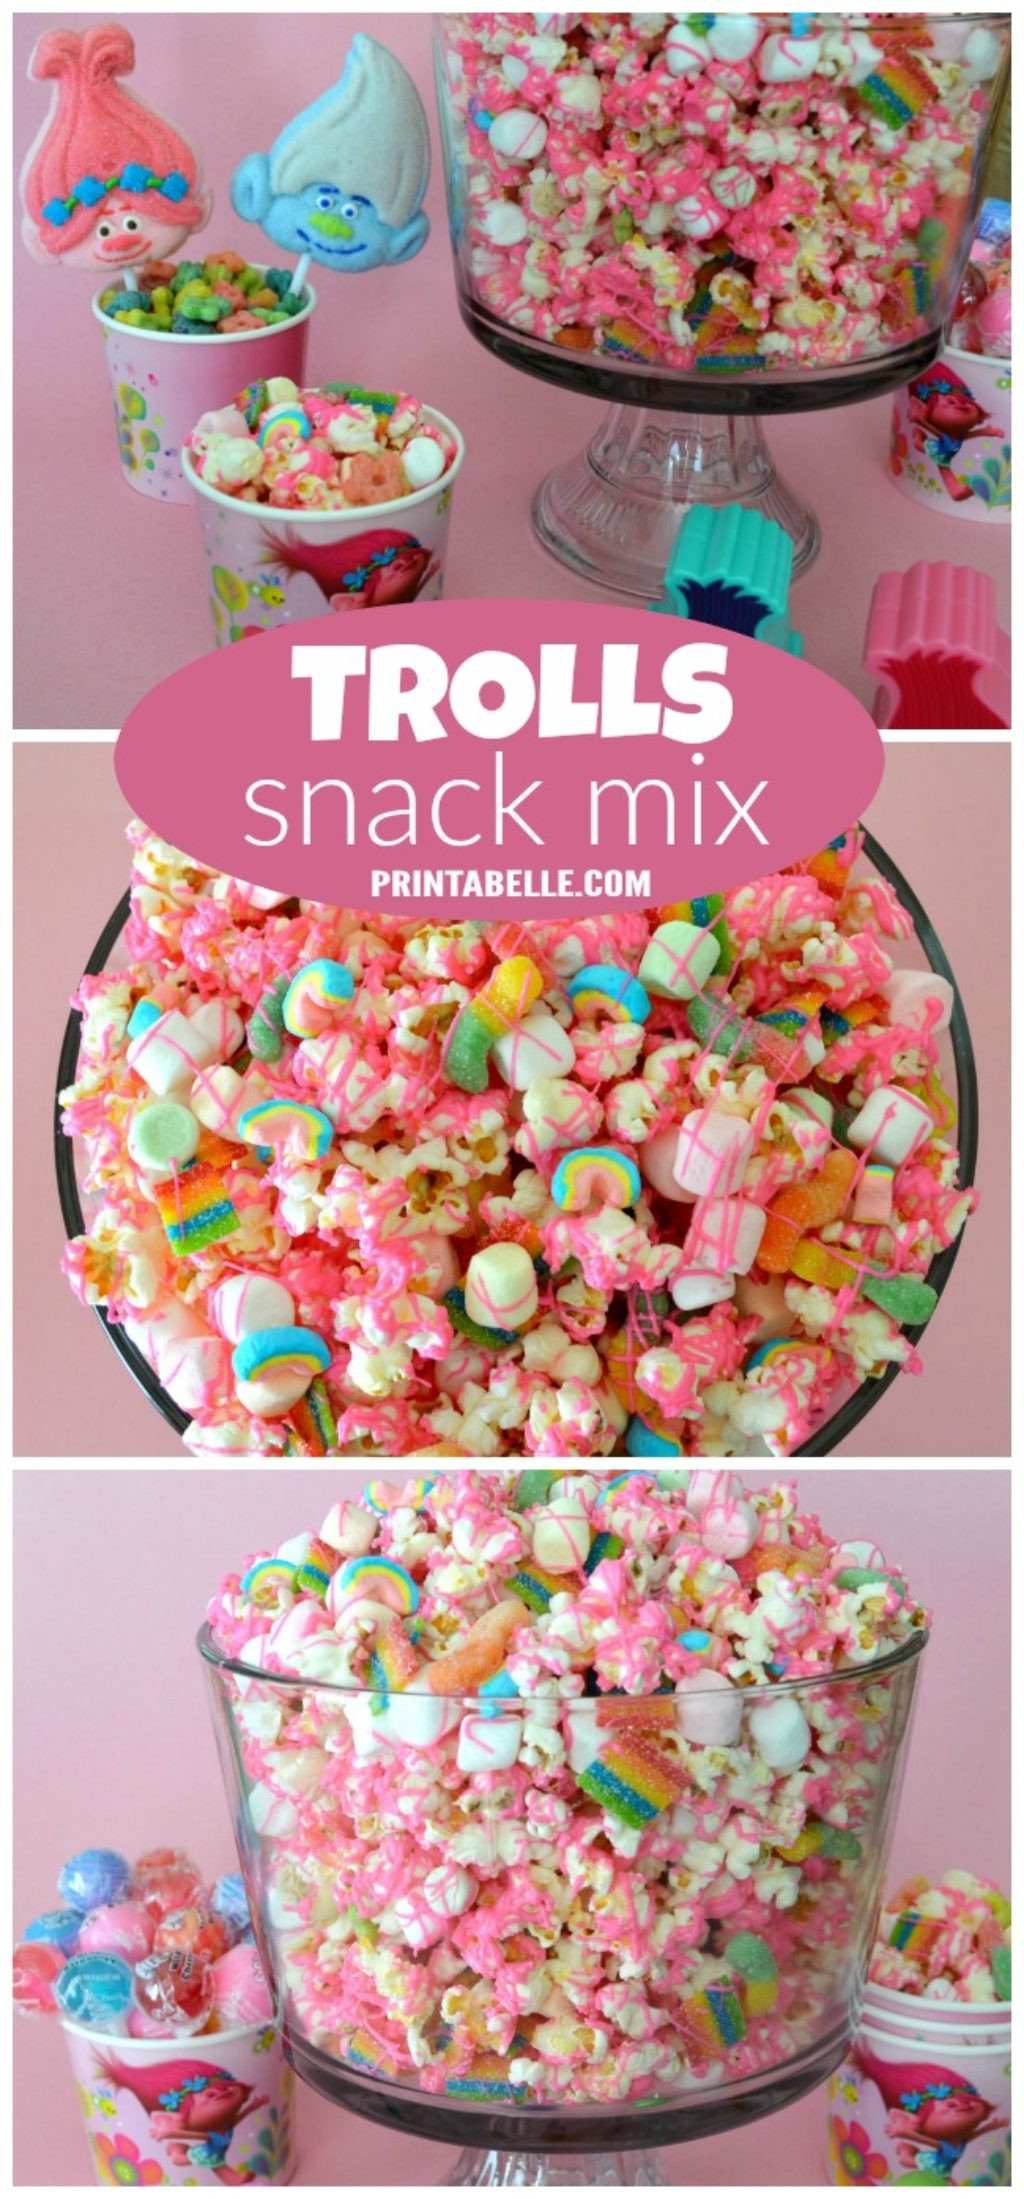 Food Ideas For Trolls Party
 Poppy’s Pink Trolls Party Snack Mix – Party Printable